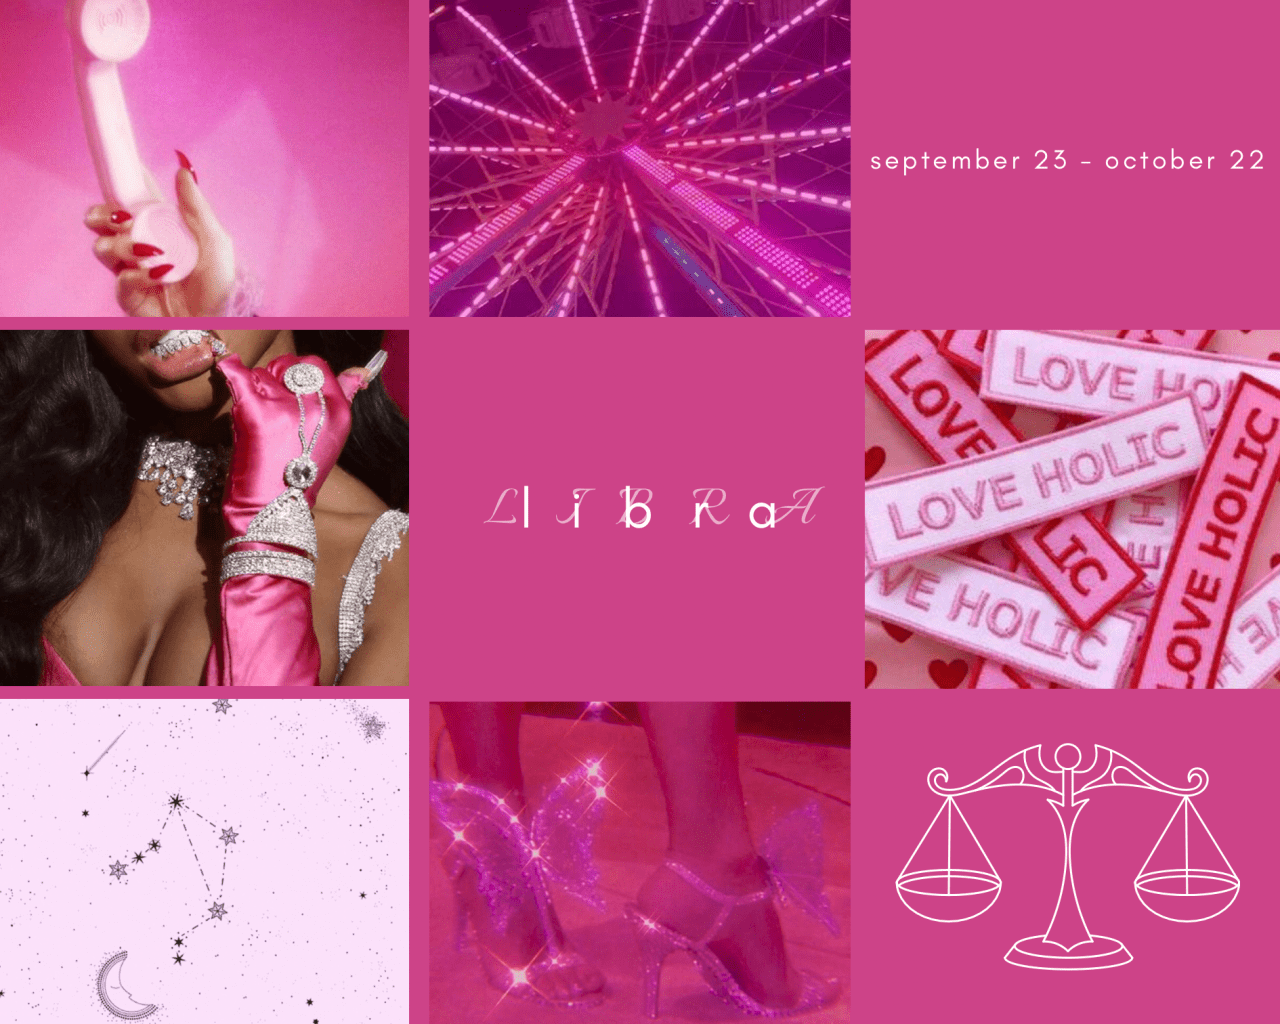 A collage of images representing the aesthetic of the zodiac sign Libra. - Libra